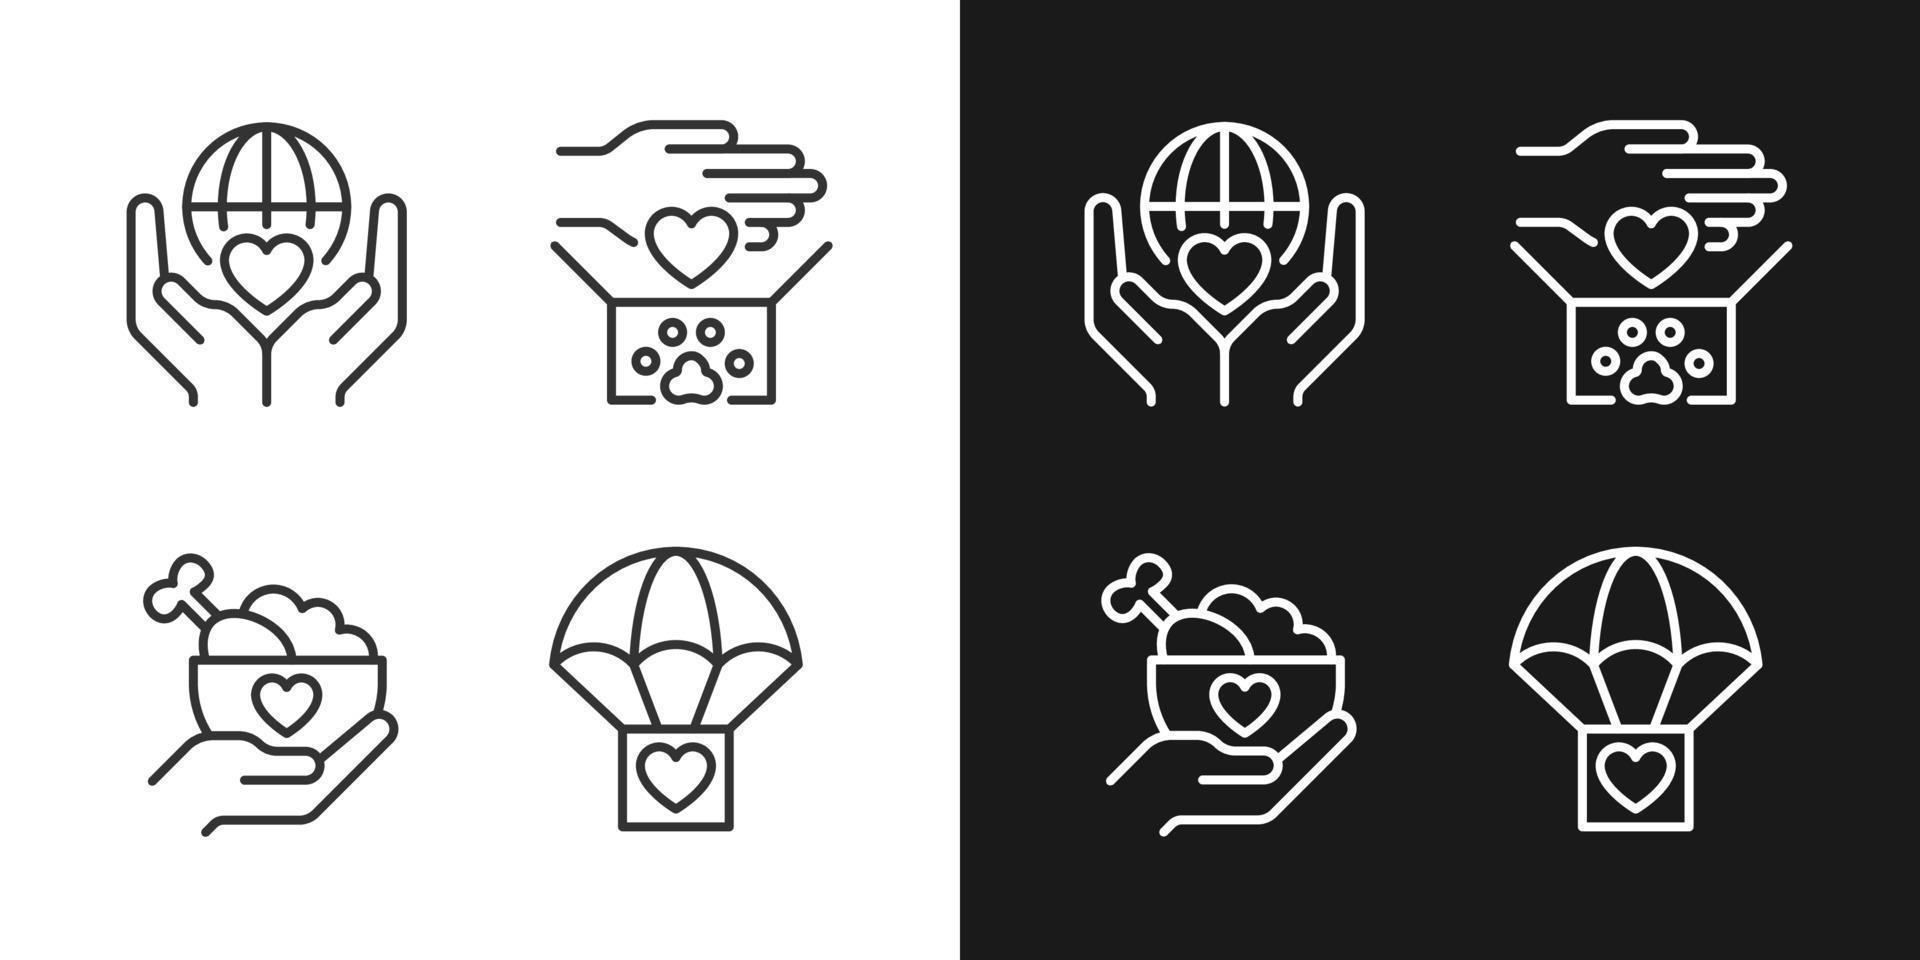 Helping others pixel perfect linear icons set for dark, light mode. Charitable organization. Animal donation. Thin line symbols for night, day theme. Isolated illustrations. Editable stroke vector